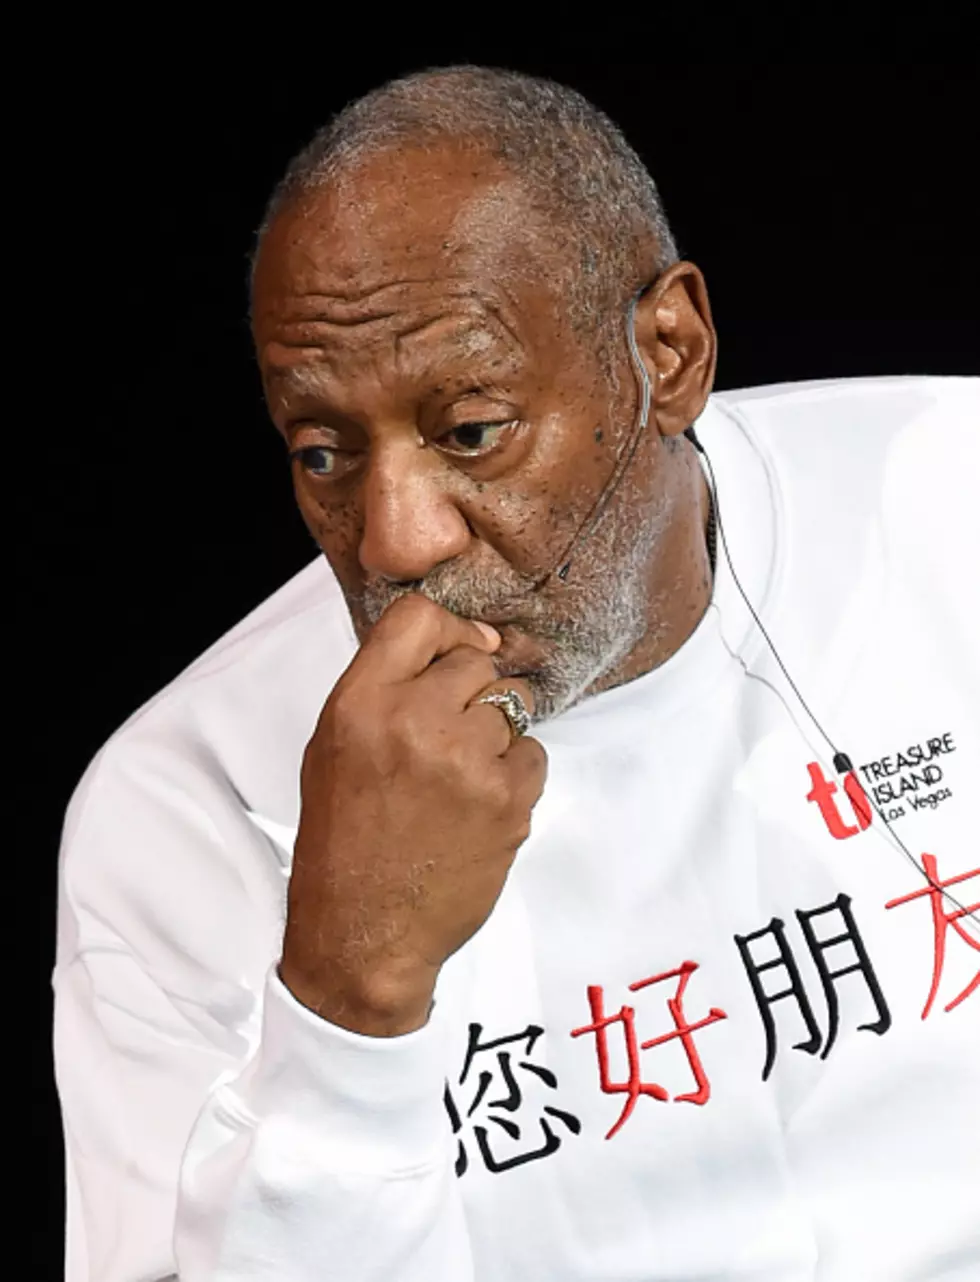 Bill Cosby 1969 Stand-Up Bit on Drugging Girls’ Drinks [Audio]